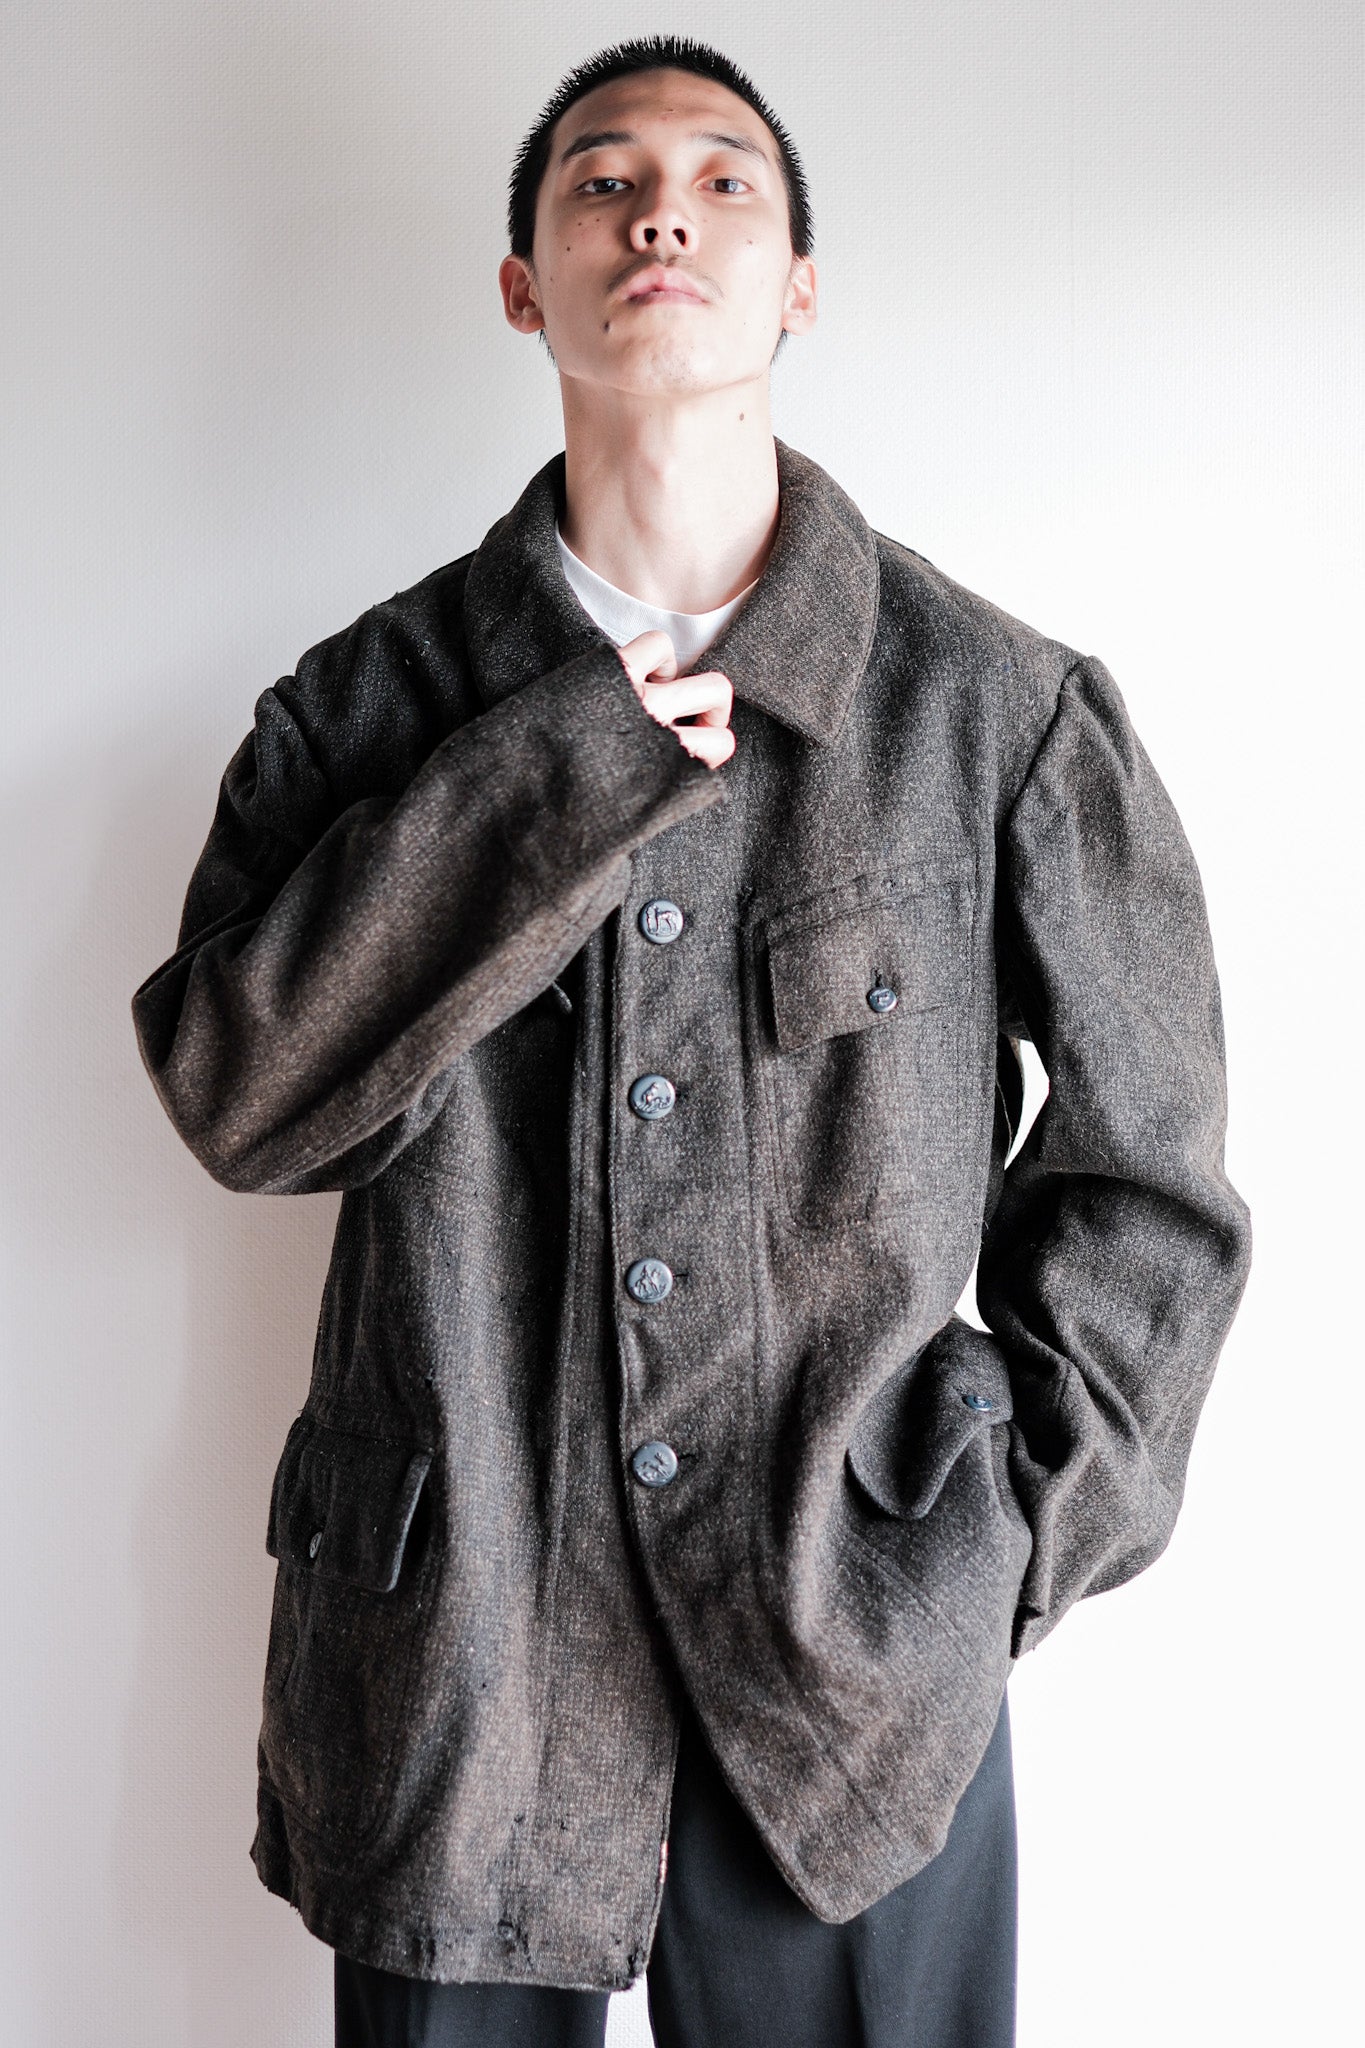 [~30's] French Vintage Grey Wool Hunting Jacket With Chin Strap "Boro"